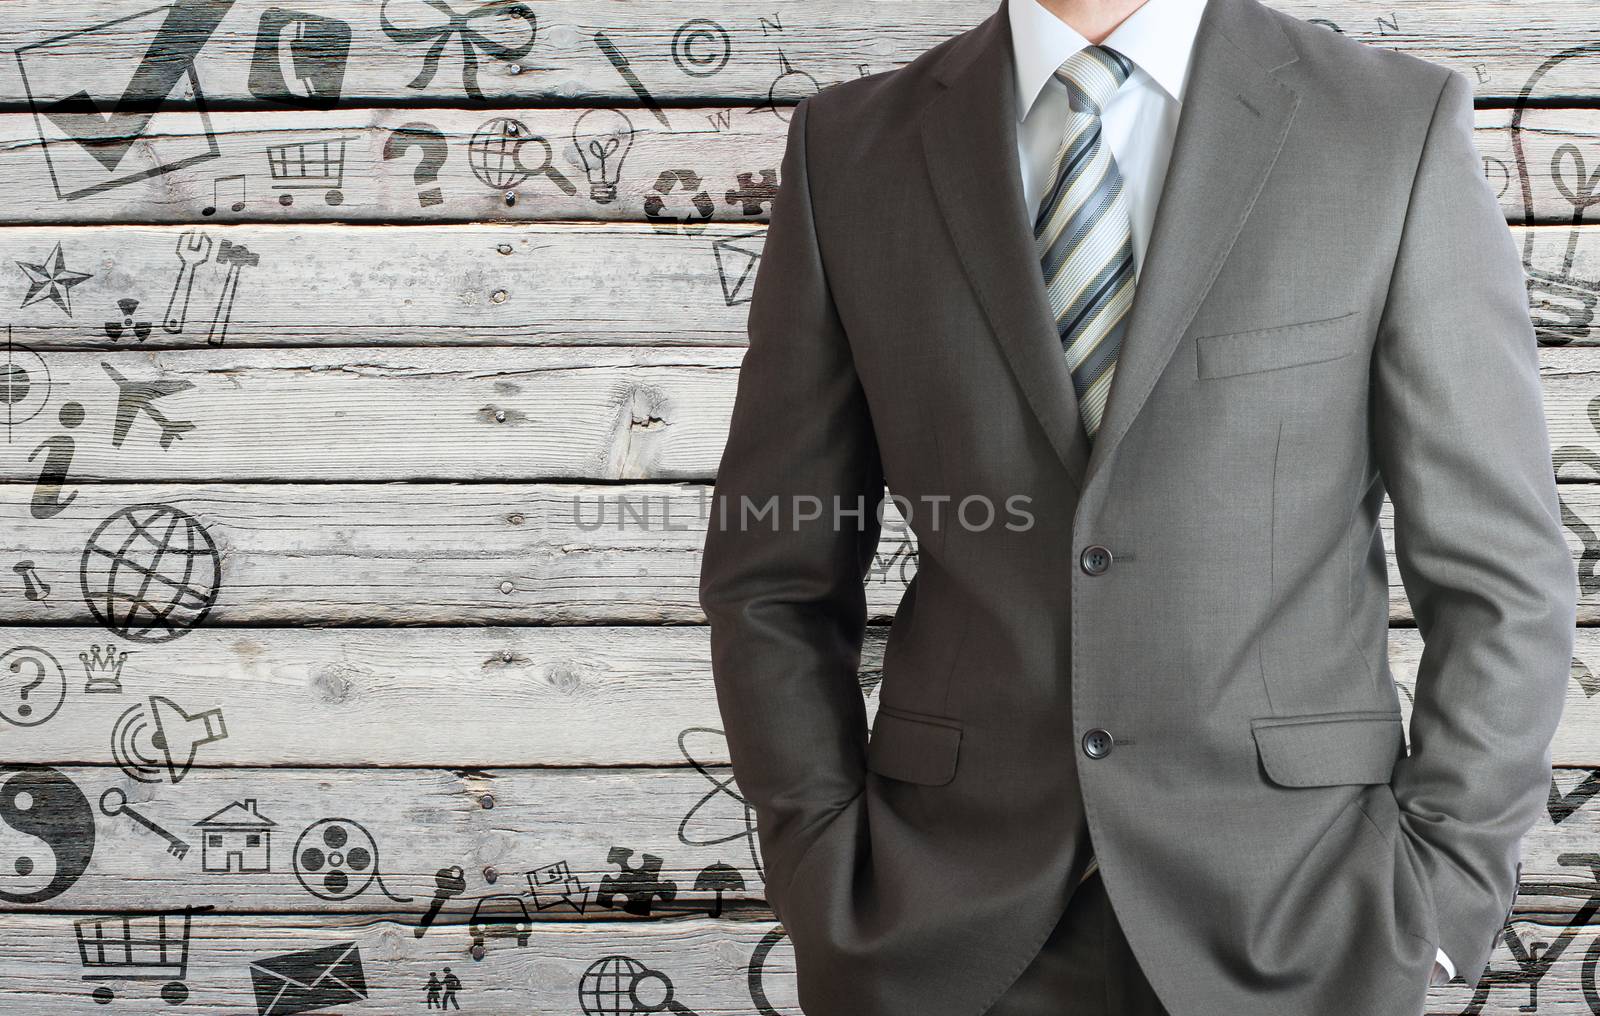 Businessman in a suit with background of various social icons on old wooden surface. Stylised frame